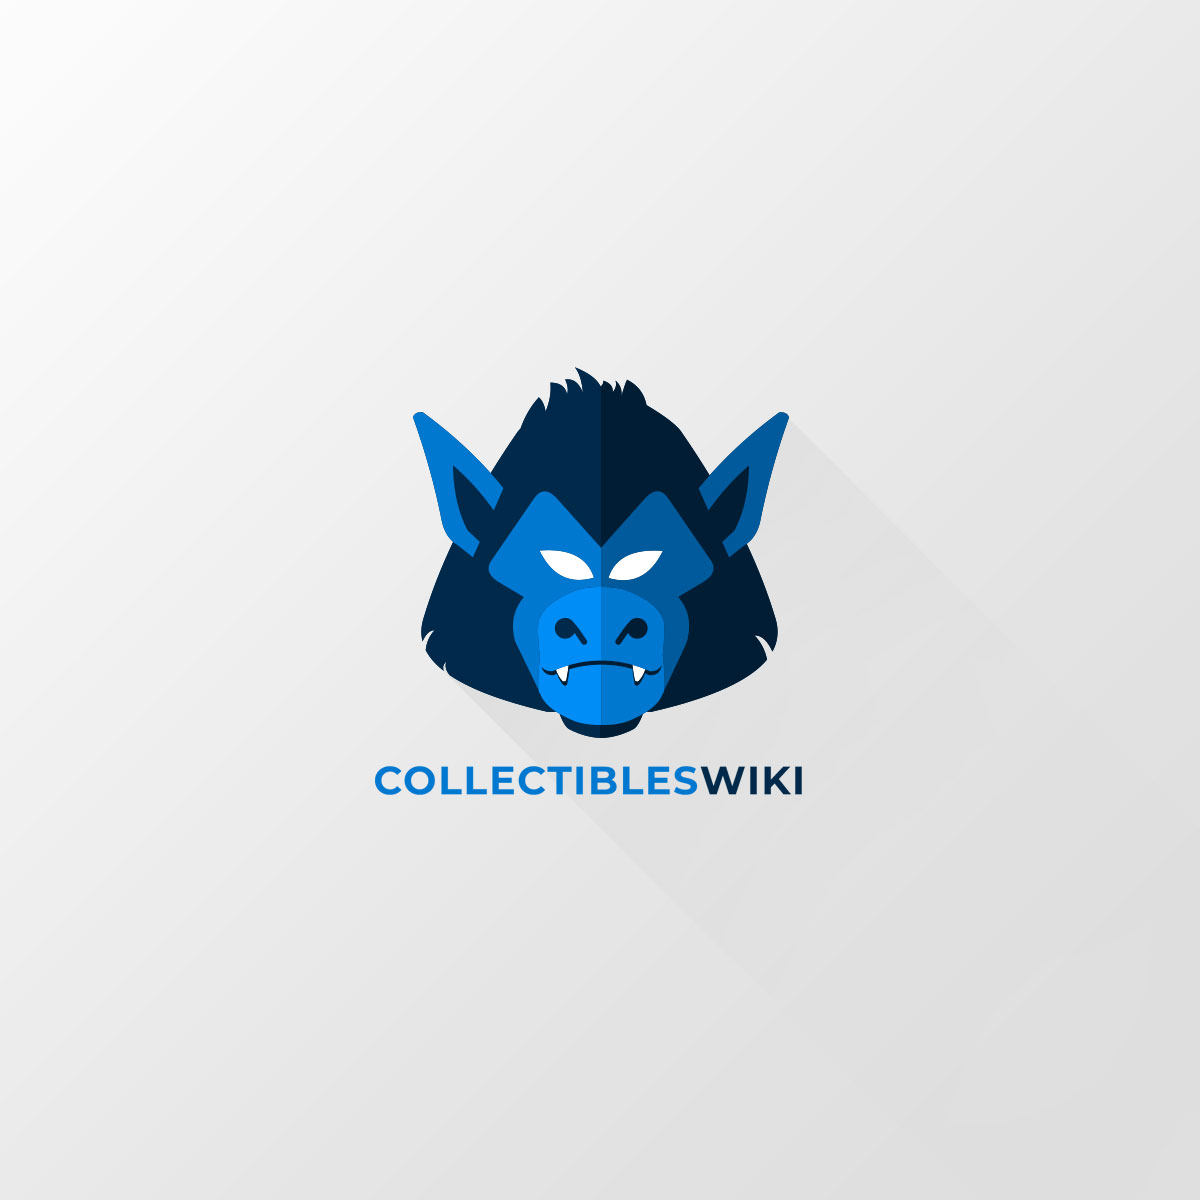 Collectibles wiki flat icon